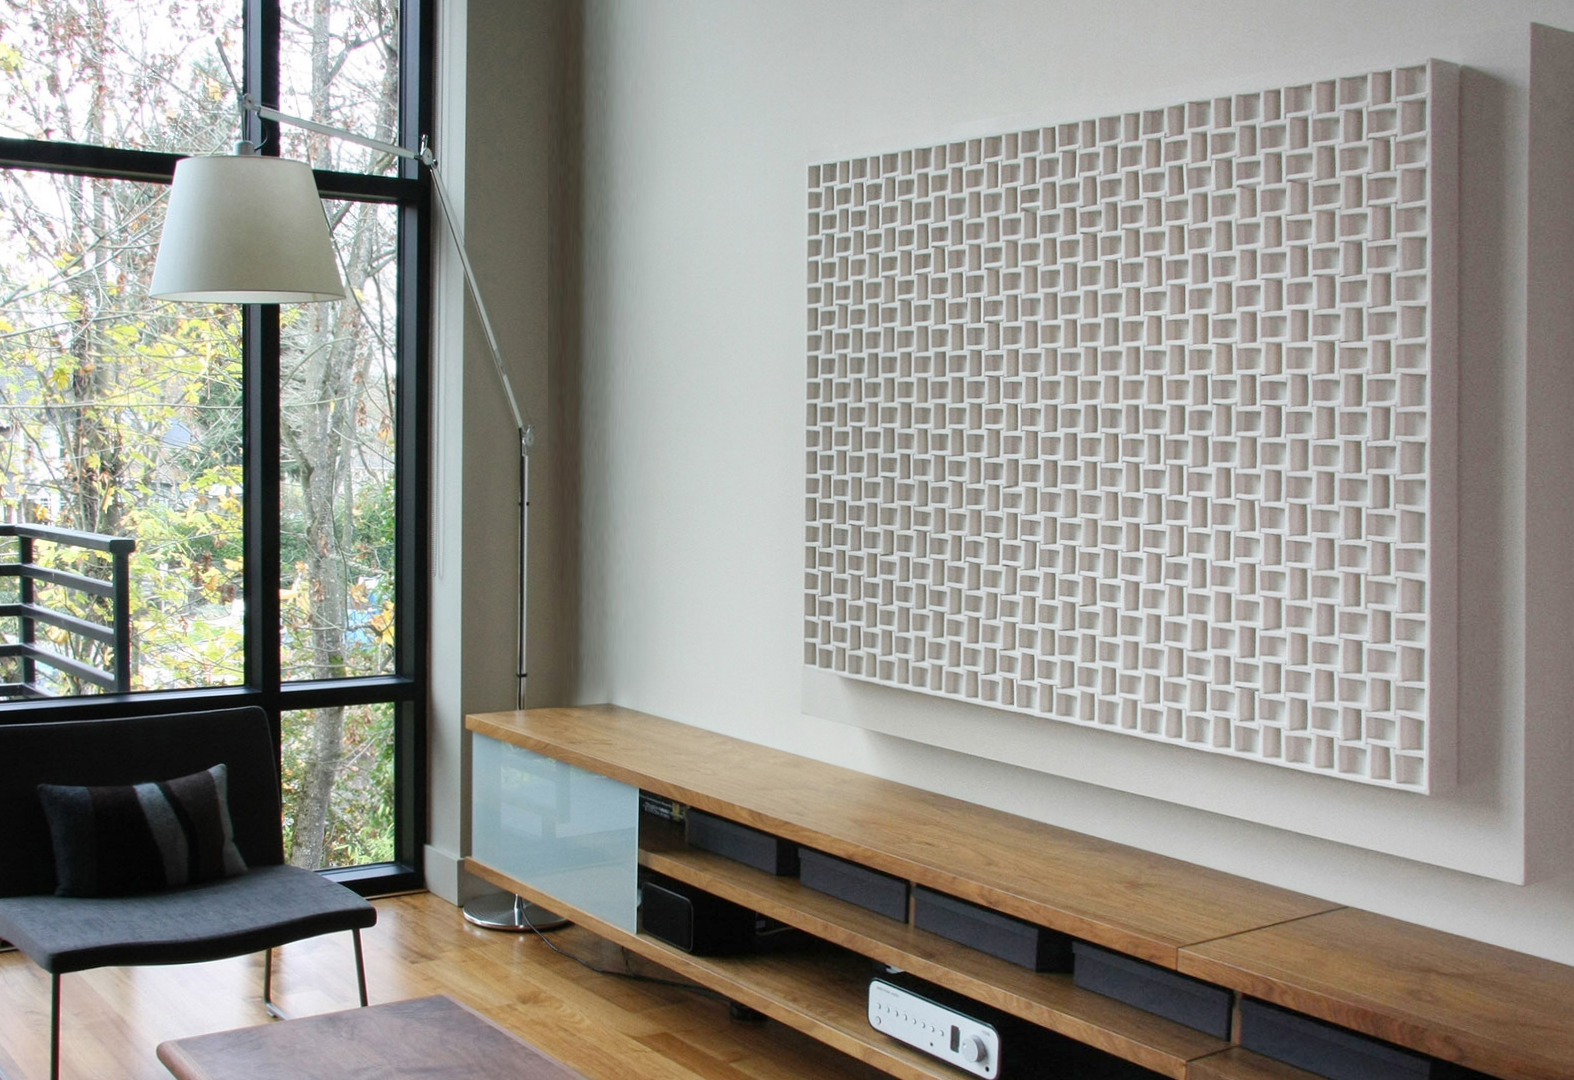 A deeply dimensional white felt grid-like wall panel in an apartment with large windows